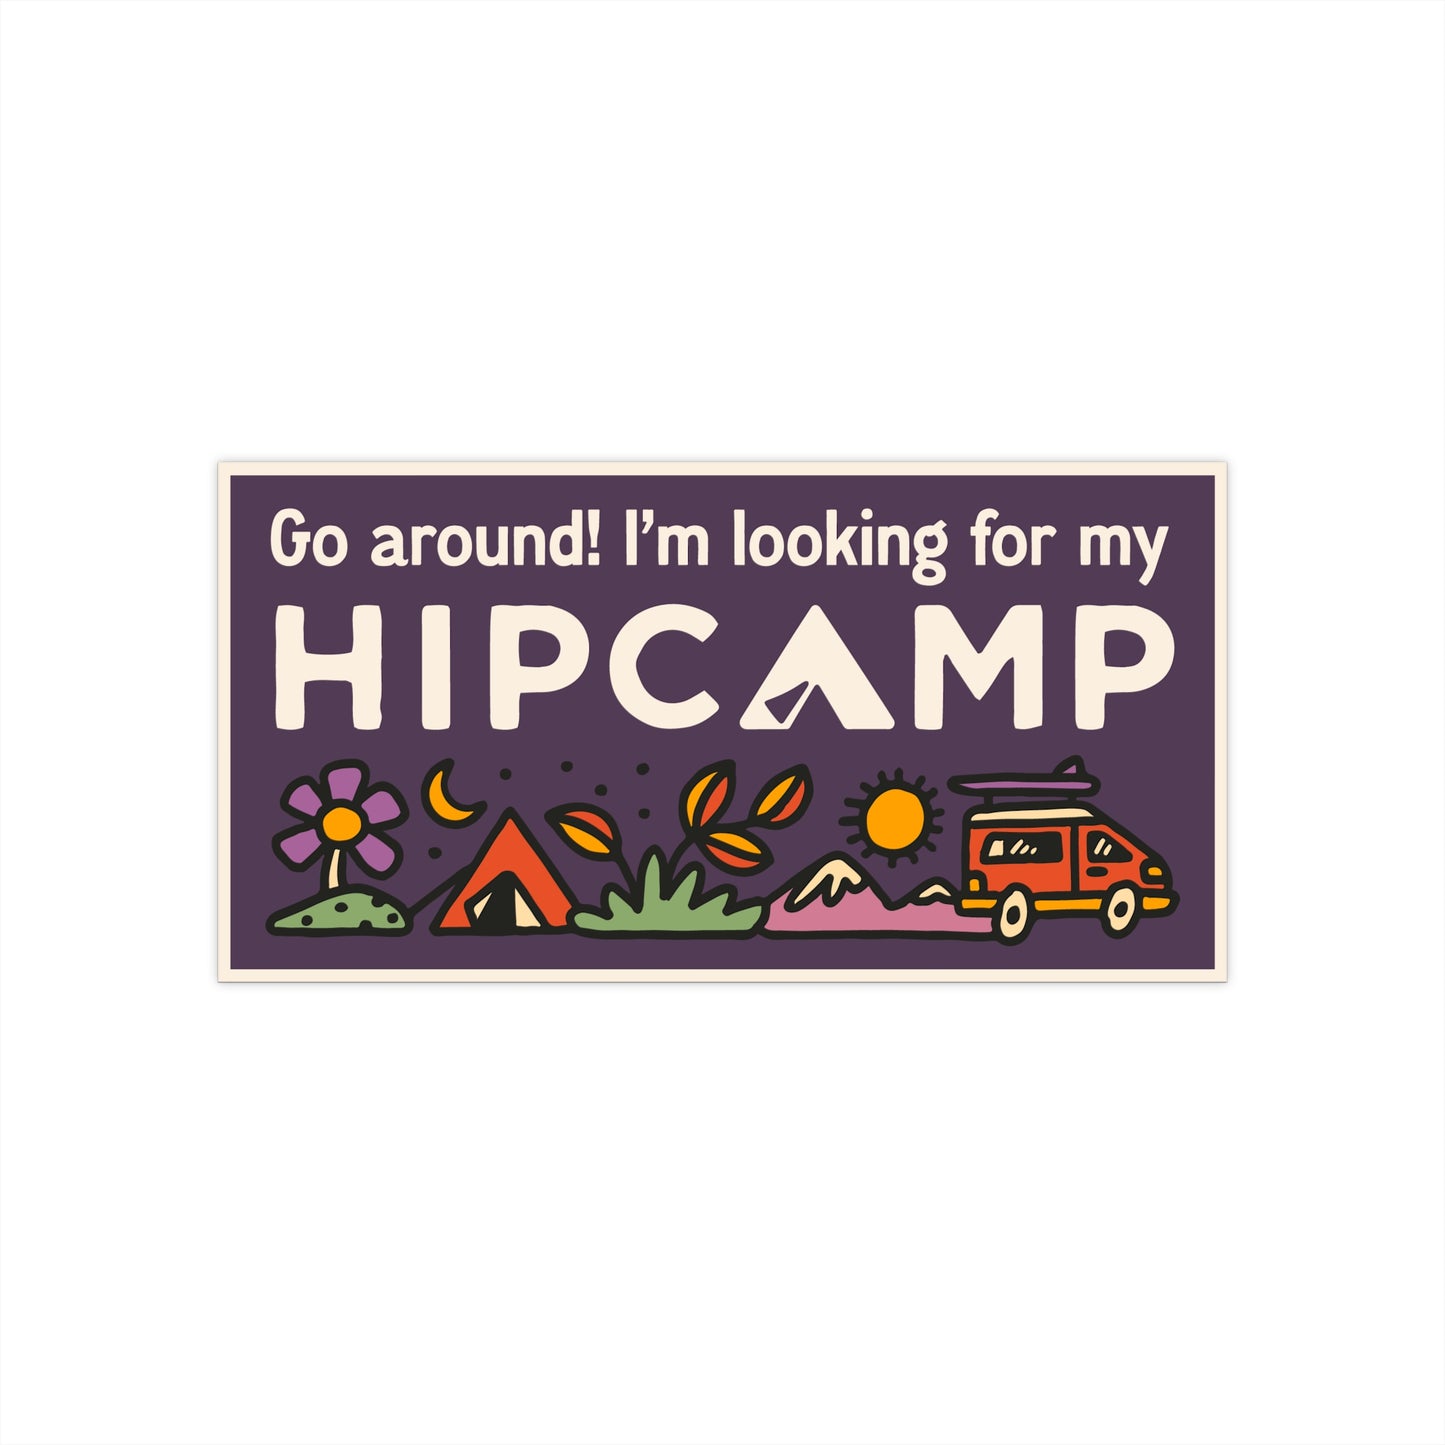 "Go around! I'm looking for my Hipcamp" Bumper Sticker